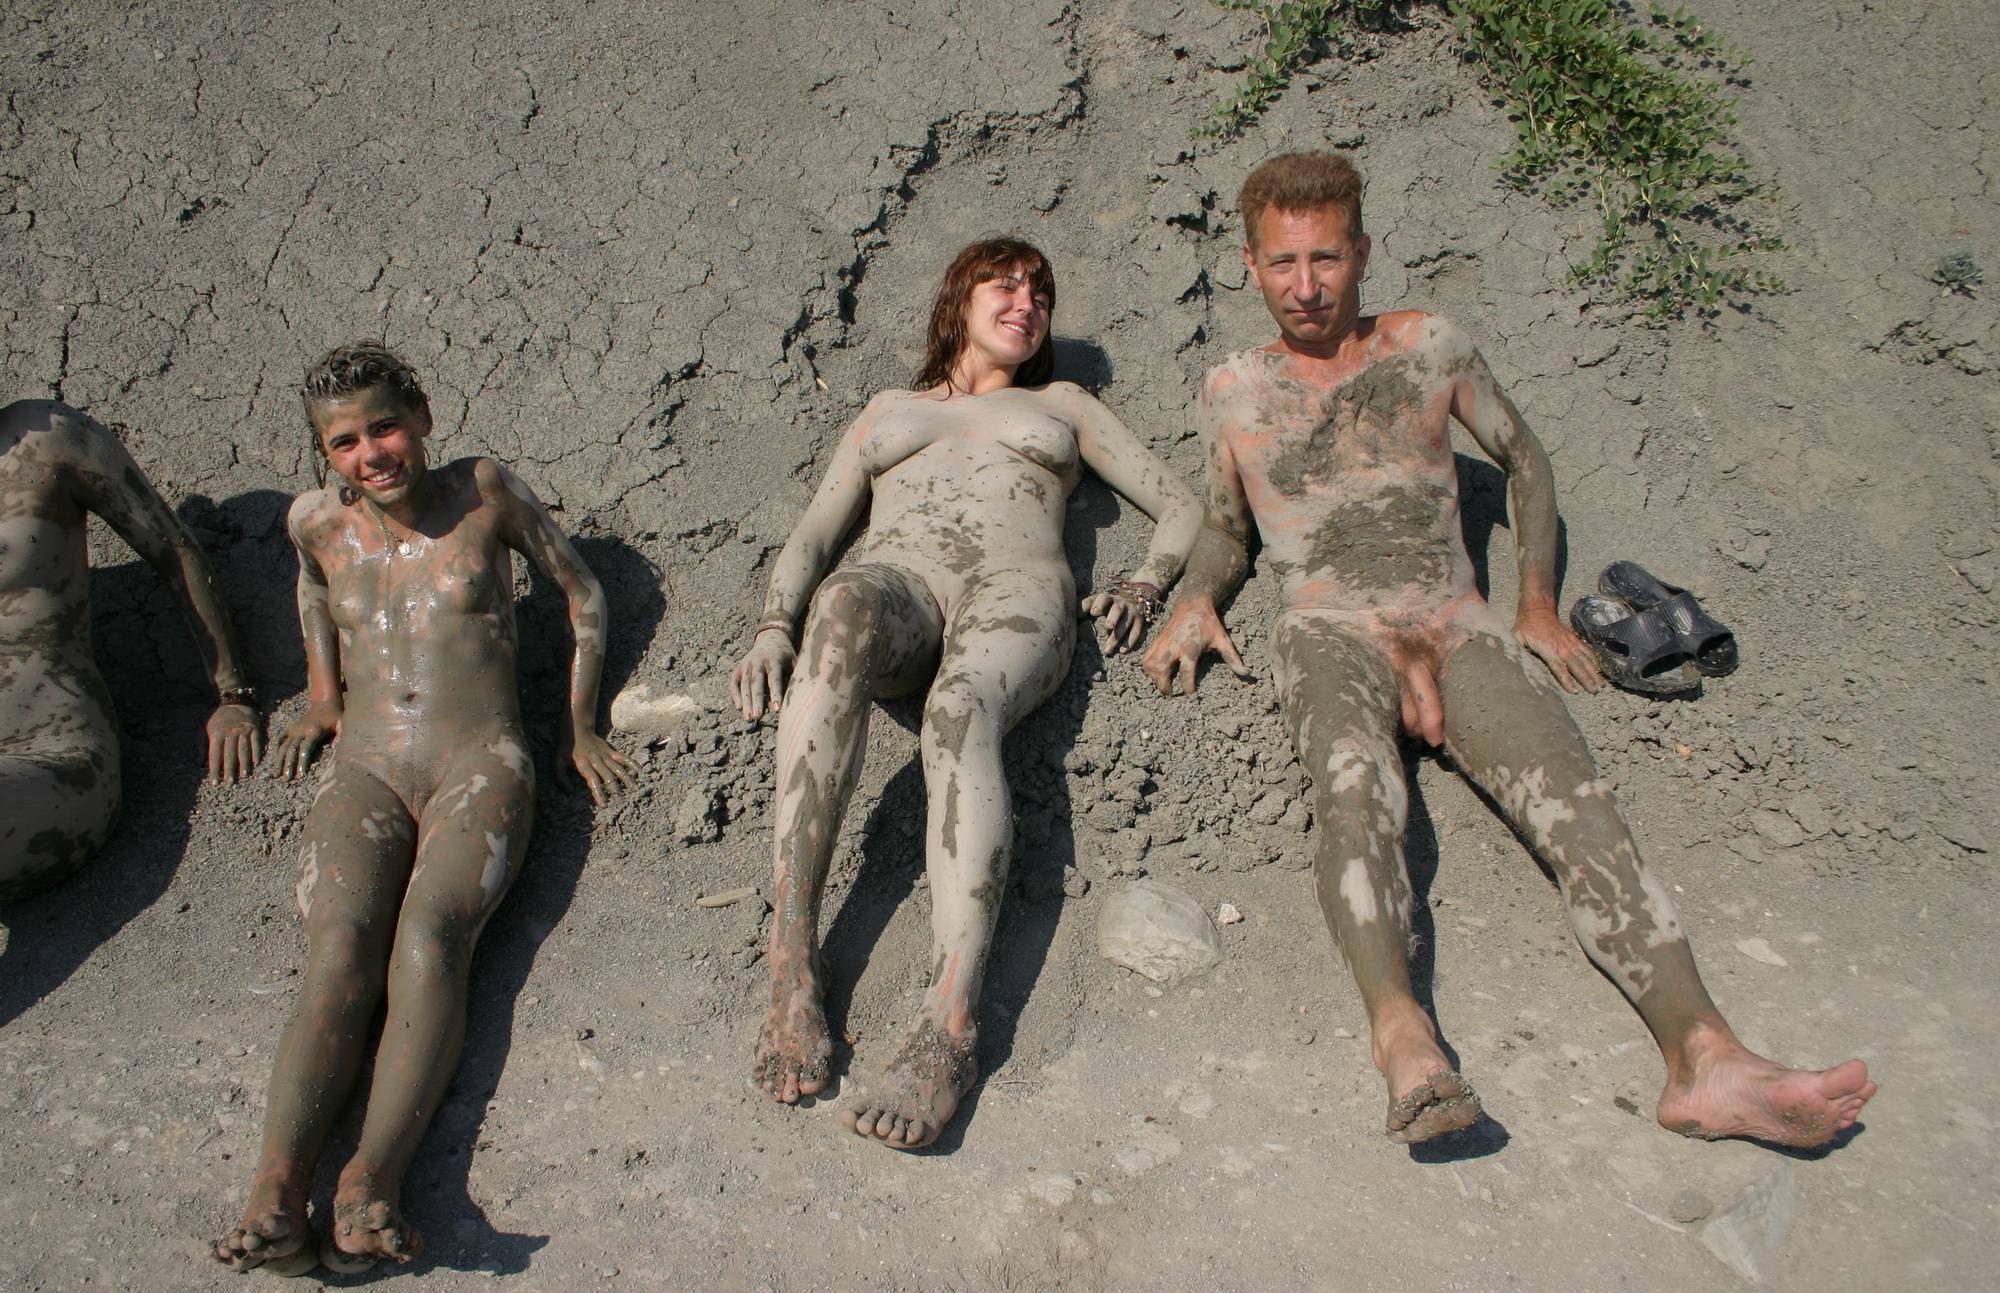 Pure Nudism-Mud Sand Family Groups - 2